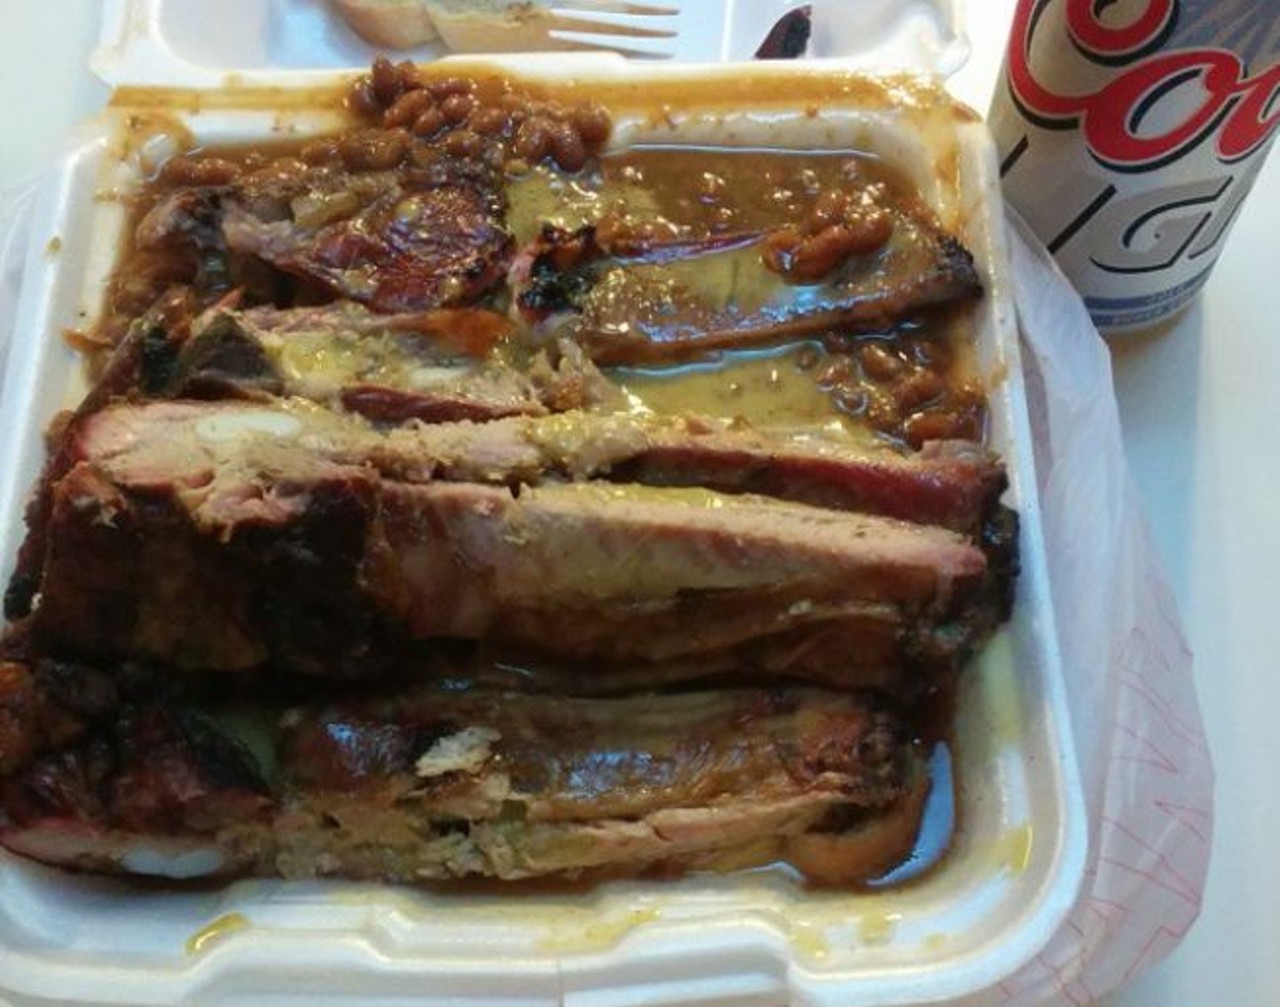 Try this: Just load it all in sauce until it&#146;s swimming.
Photo via tom2_0/Instagram